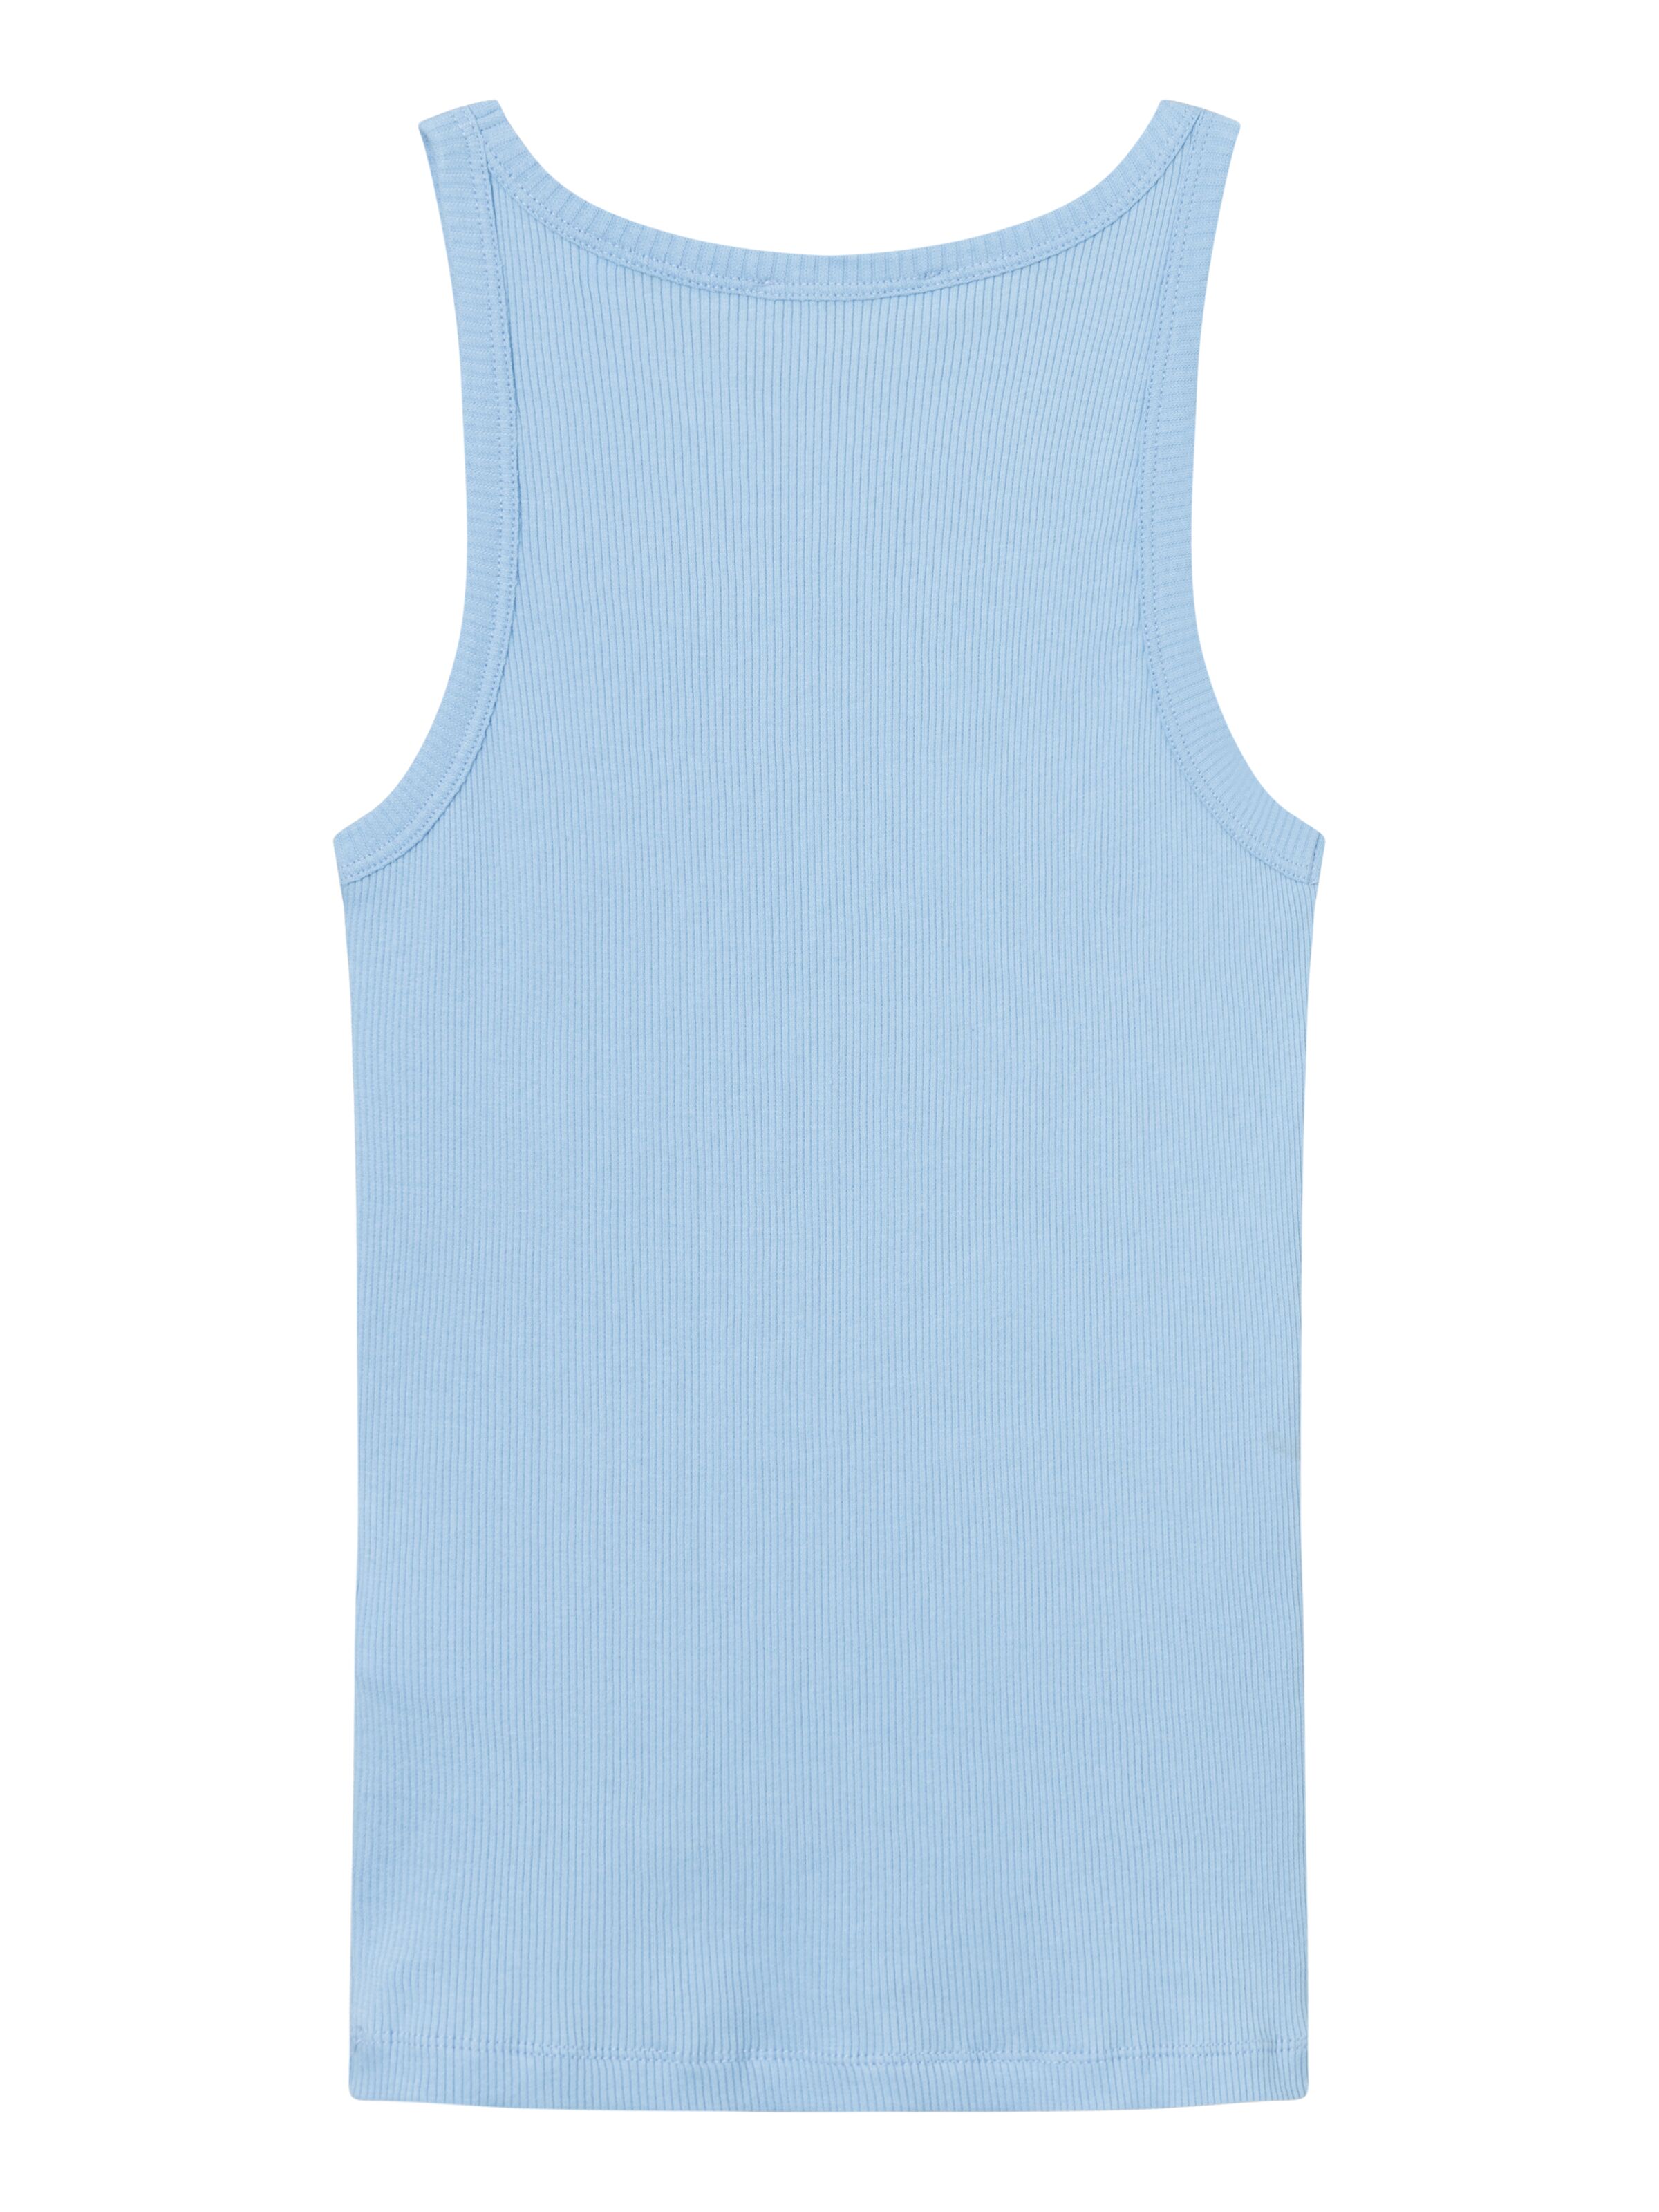 Top Racer Rib Airy Blue